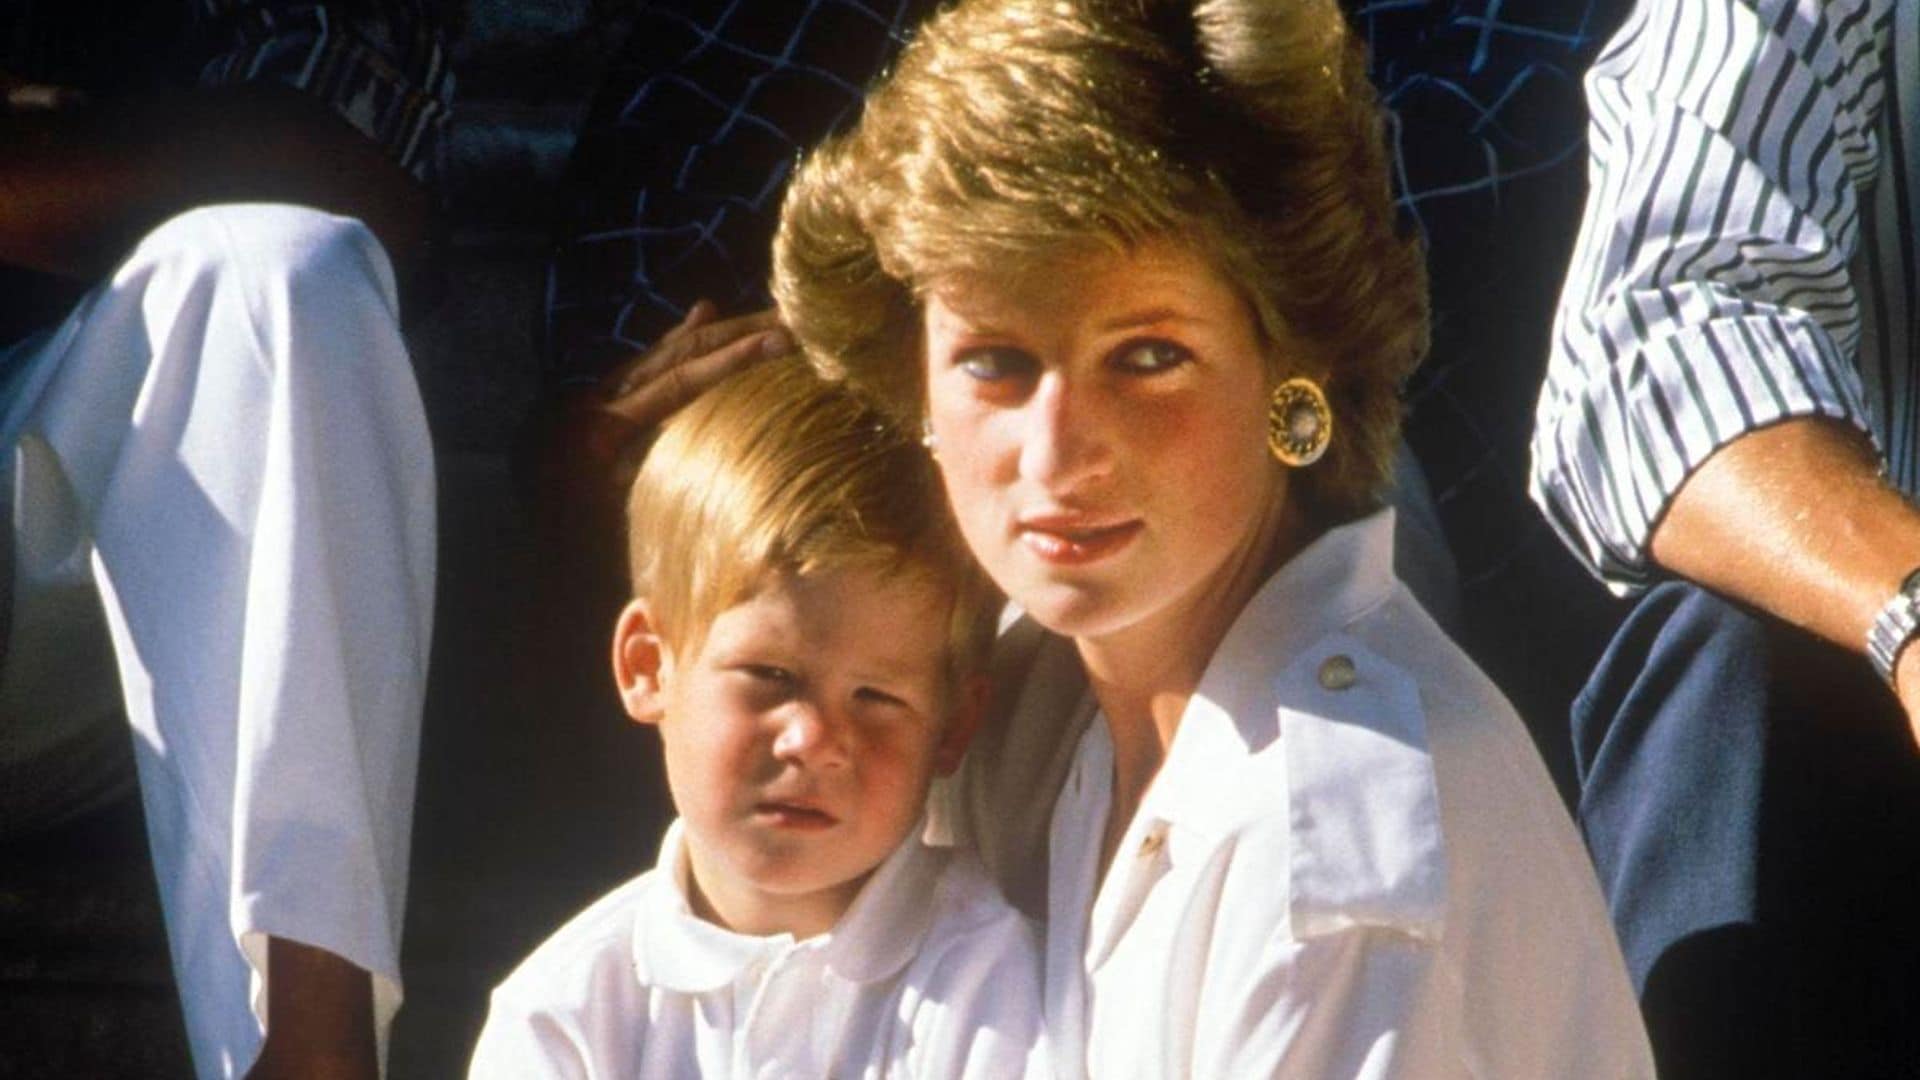 Prince Harry speaks about upcoming 25th anniversary of mom Princess Diana’s death